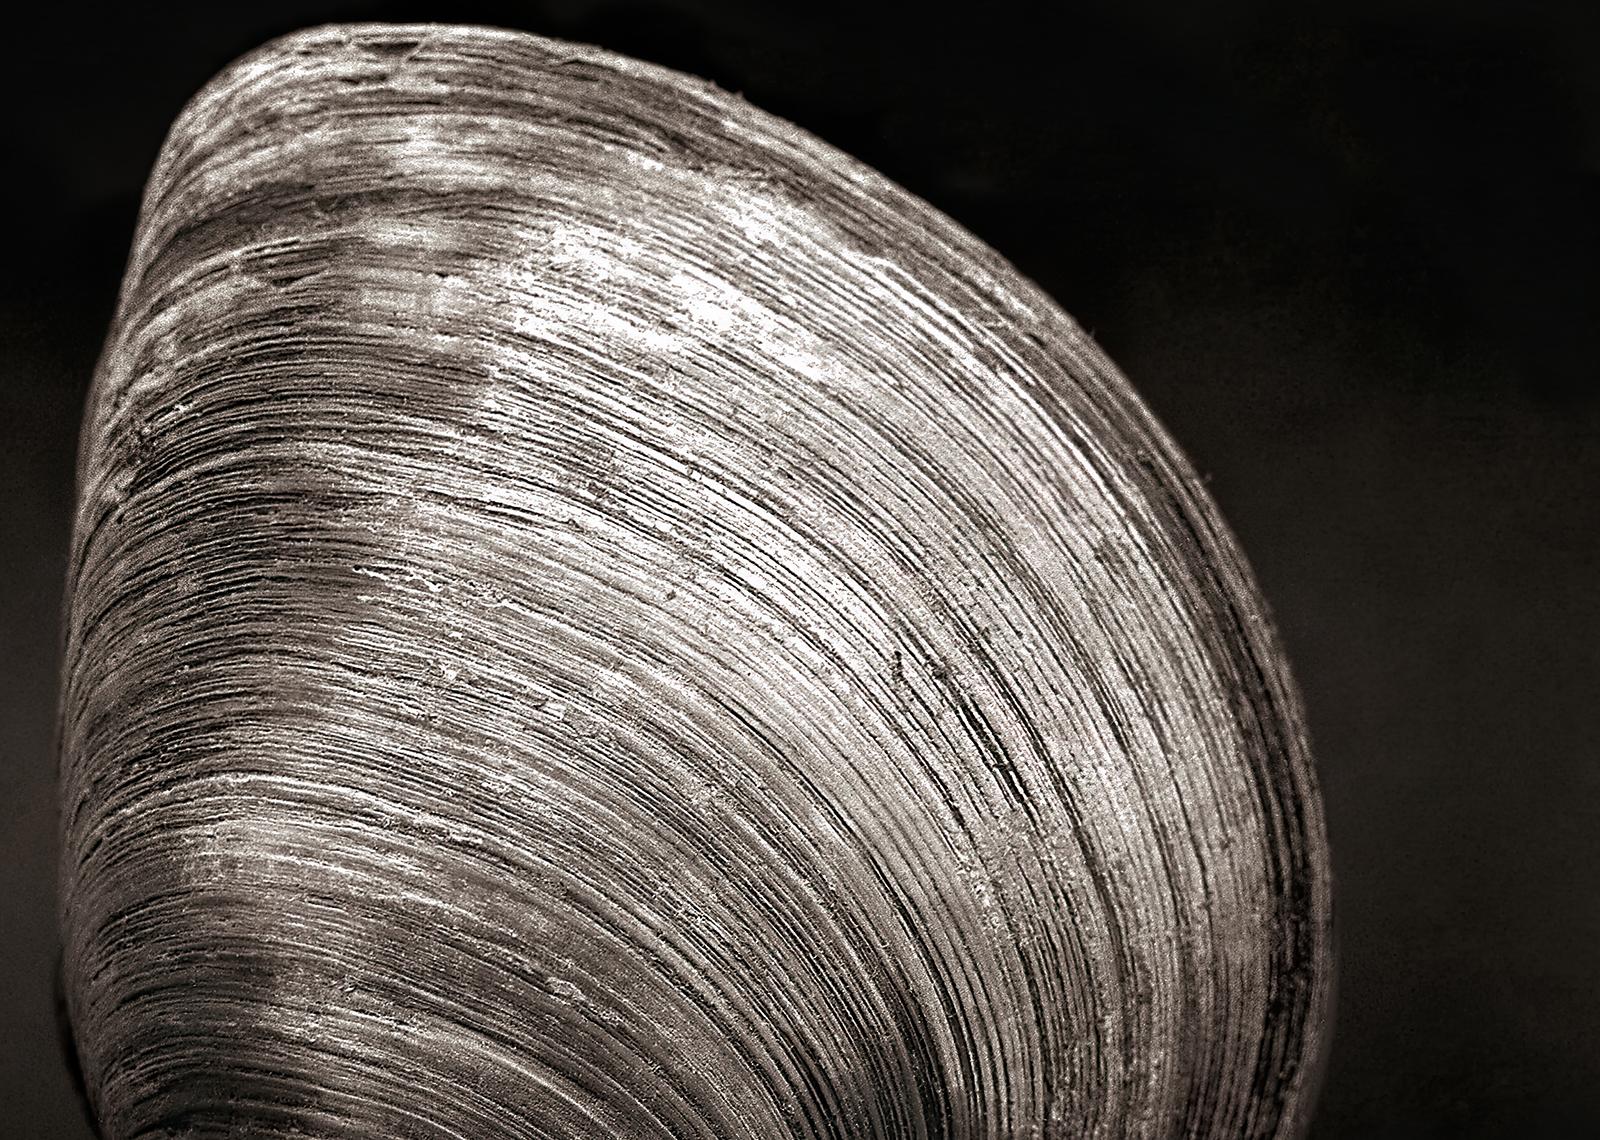 Clam- Signed limited edition nature fine art print, Black white photo, Stillife - Contemporary Photograph by Ian Sanderson